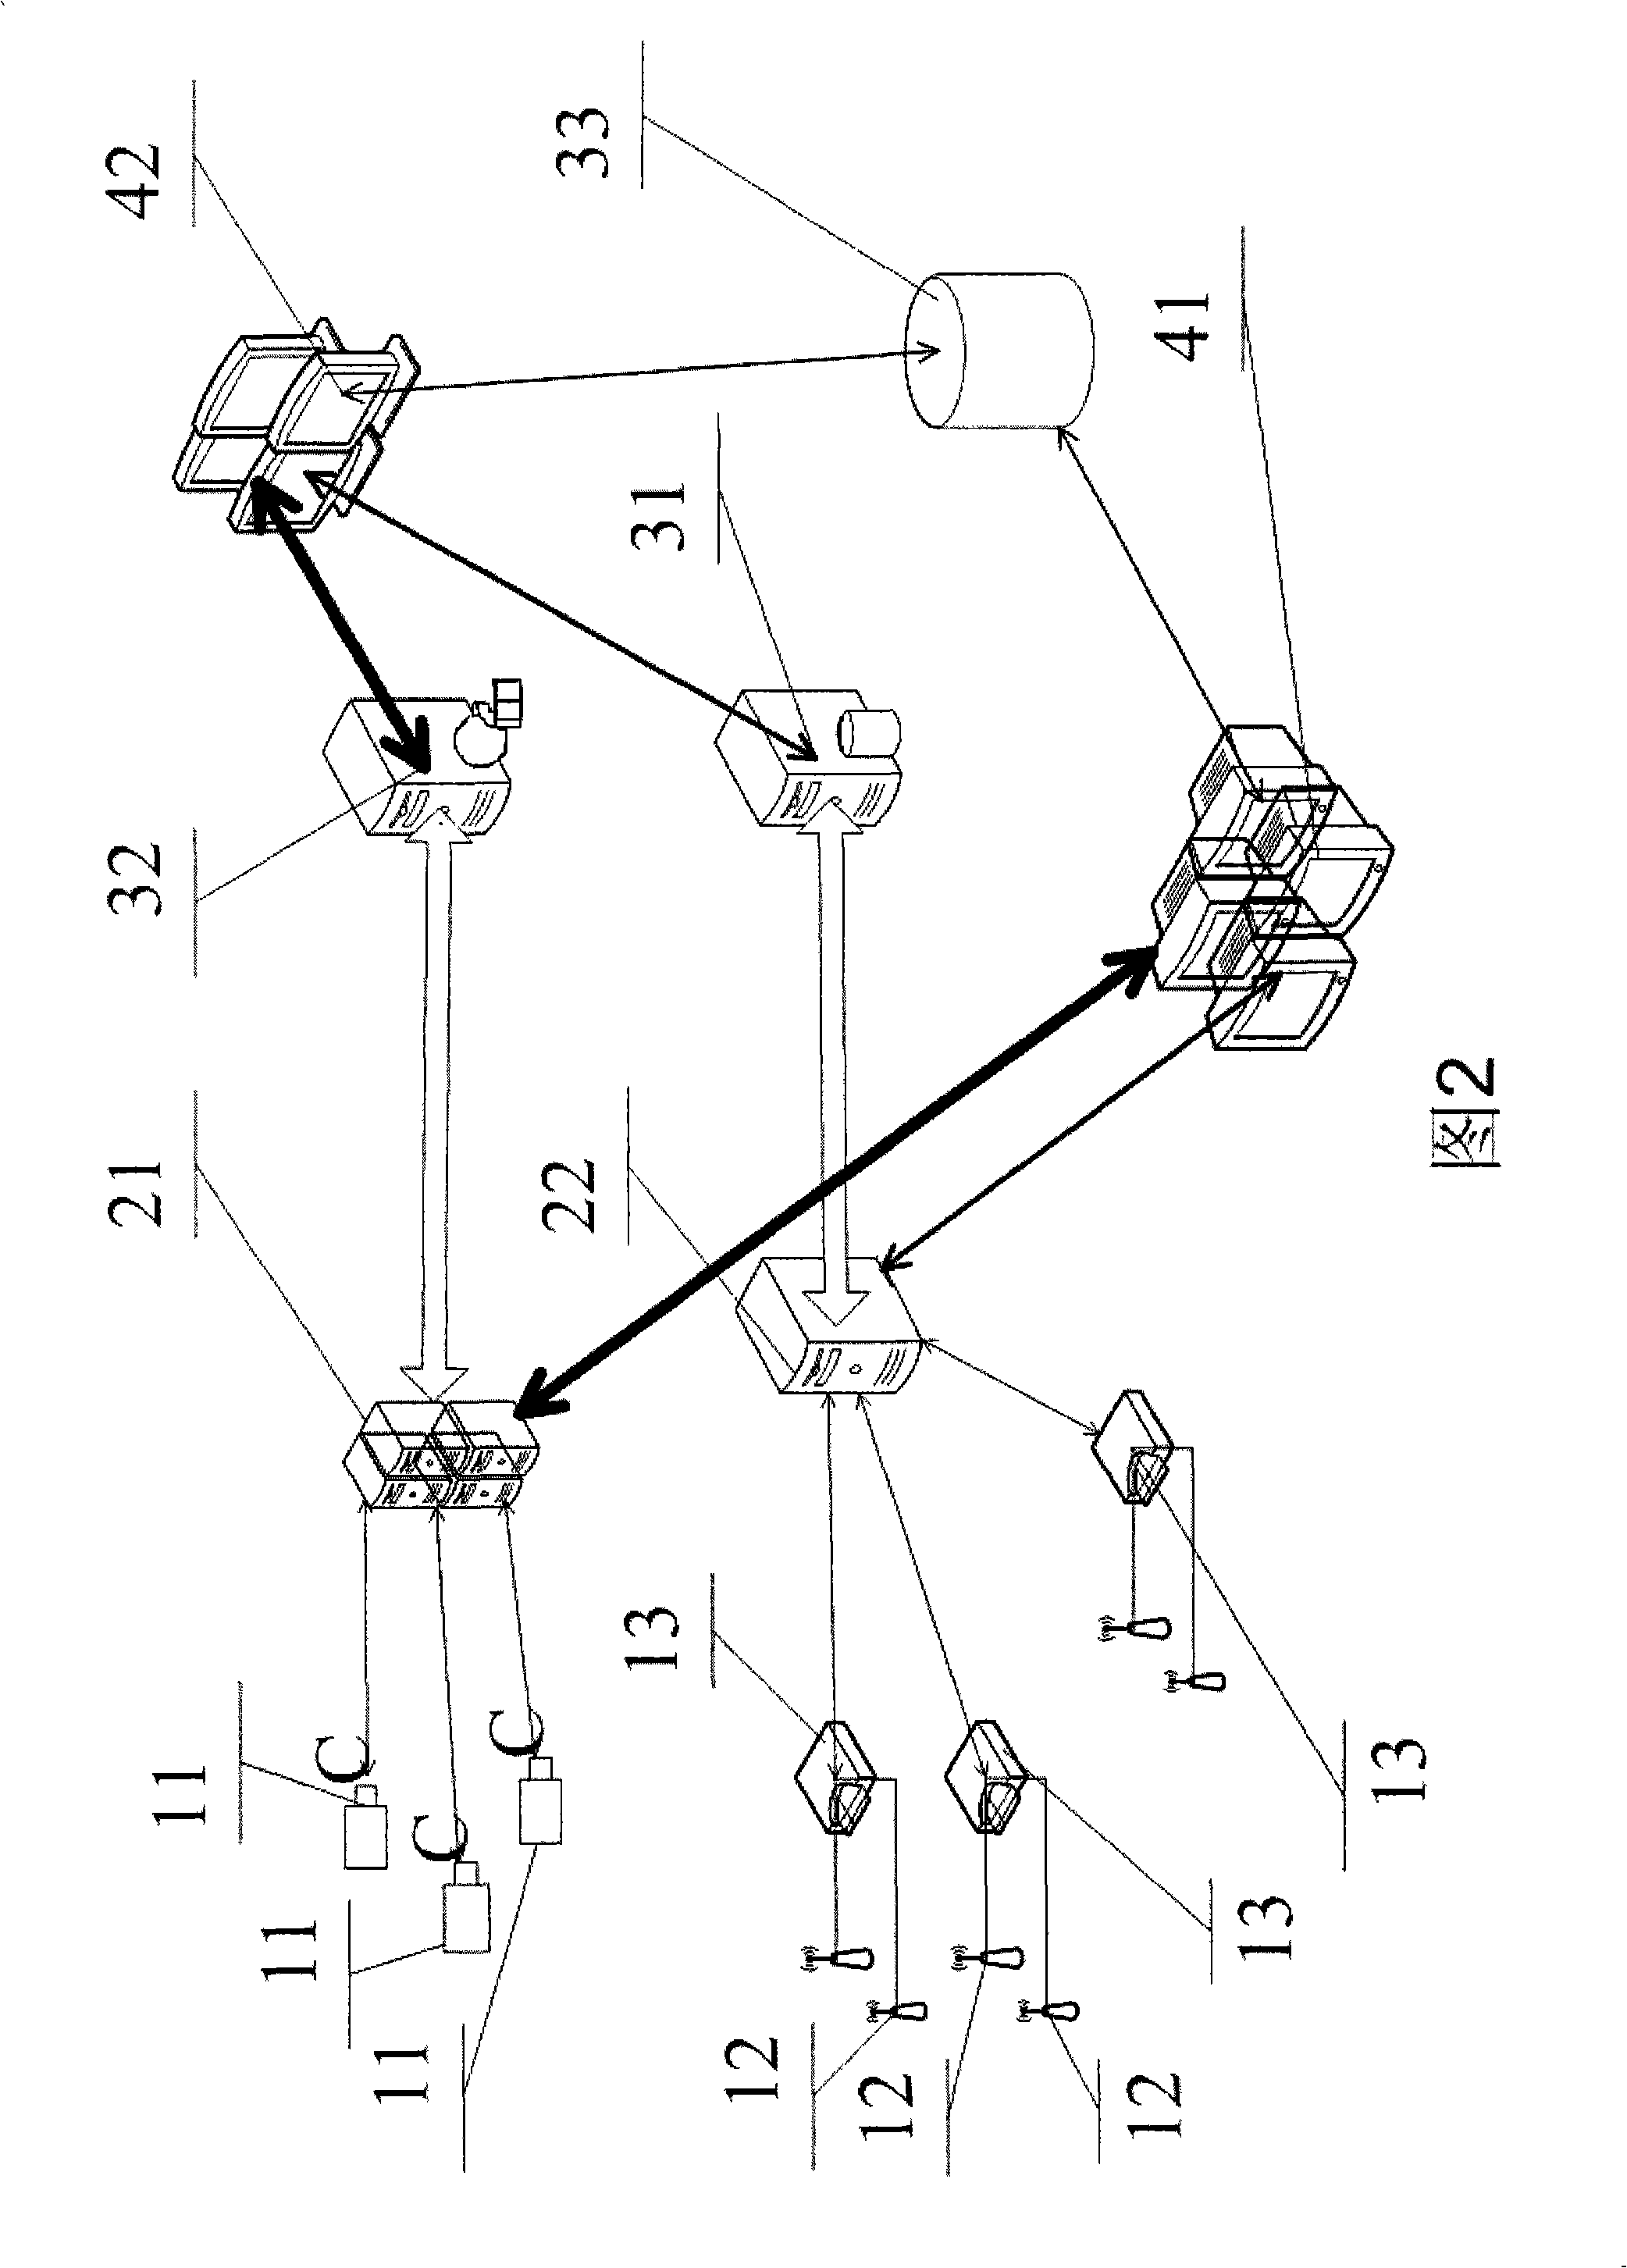 System and method for monitoring intelligent video combining wireless radio frequency recognition technique